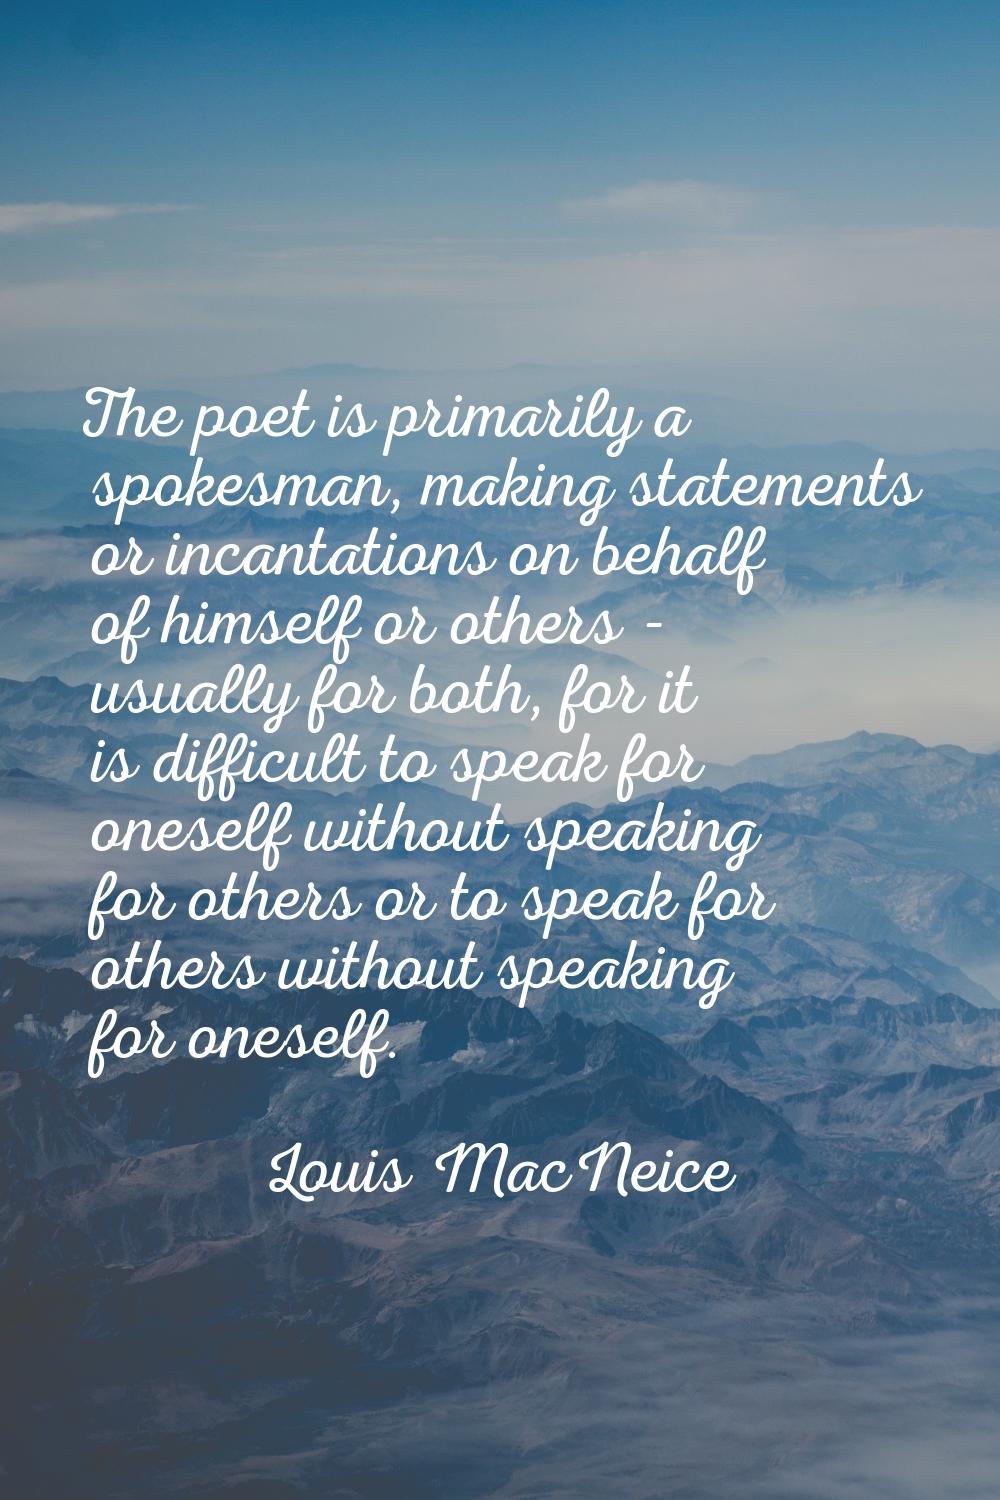 The poet is primarily a spokesman, making statements or incantations on behalf of himself or others